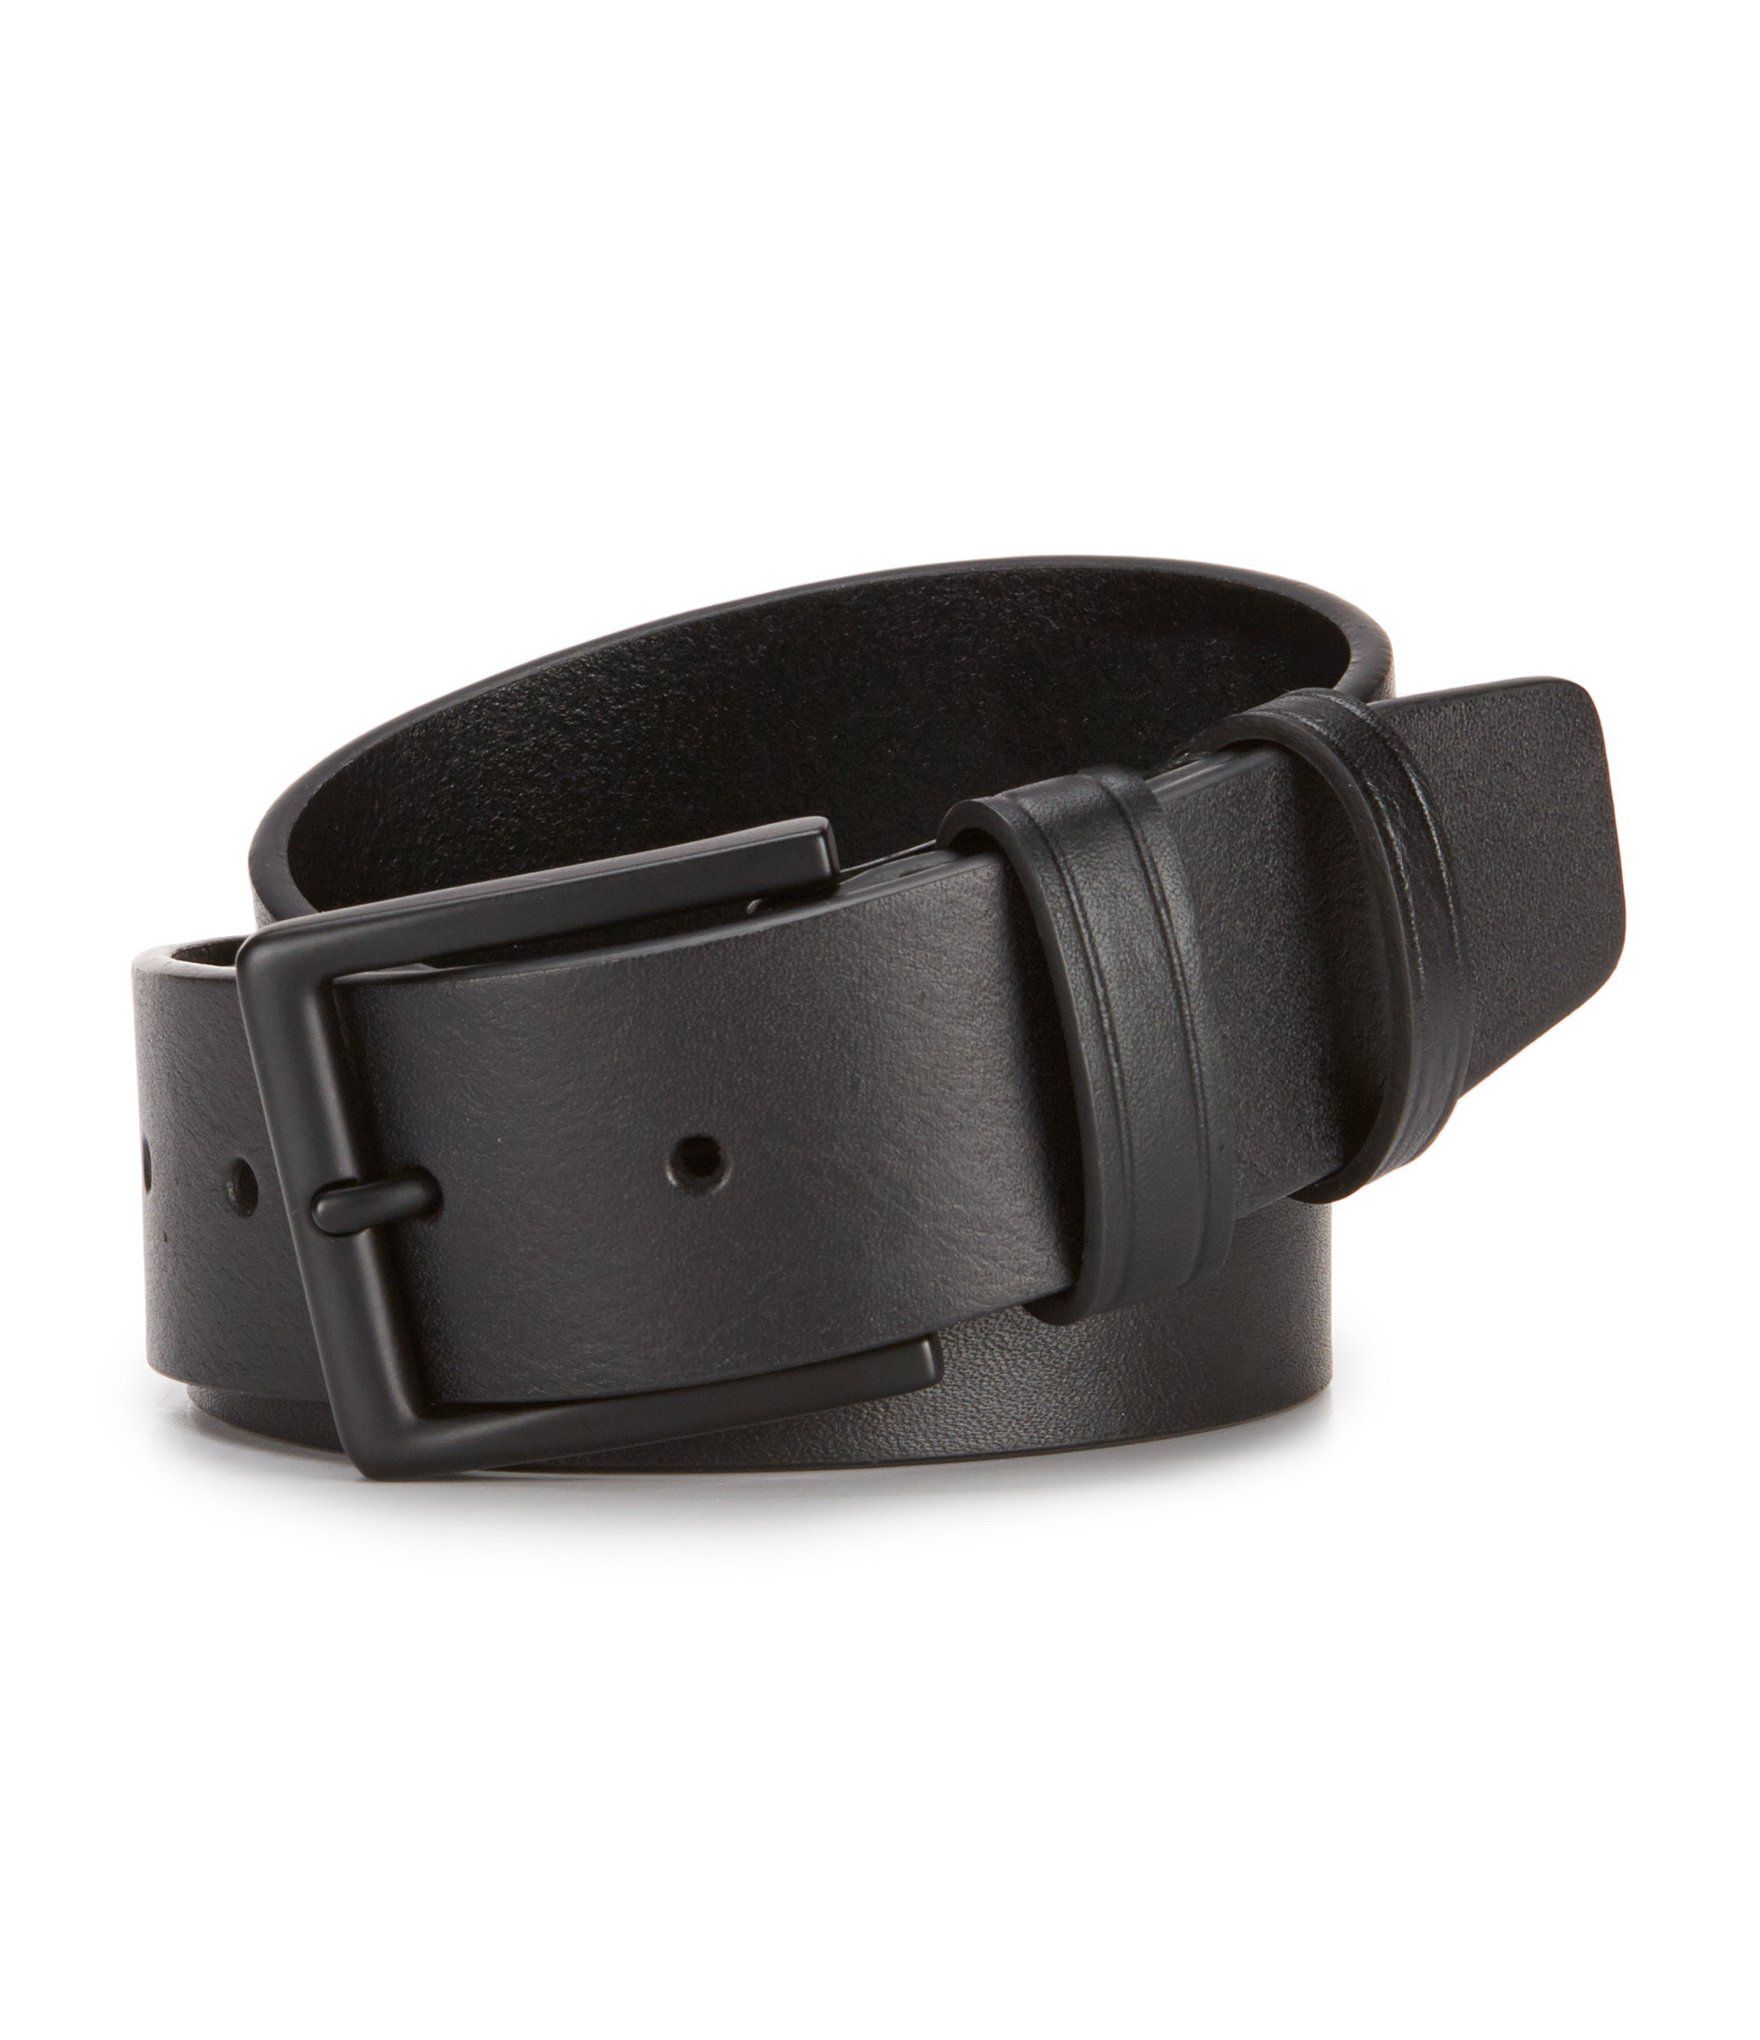 Classic Sophistication: Elevate Your Look with Black Belts